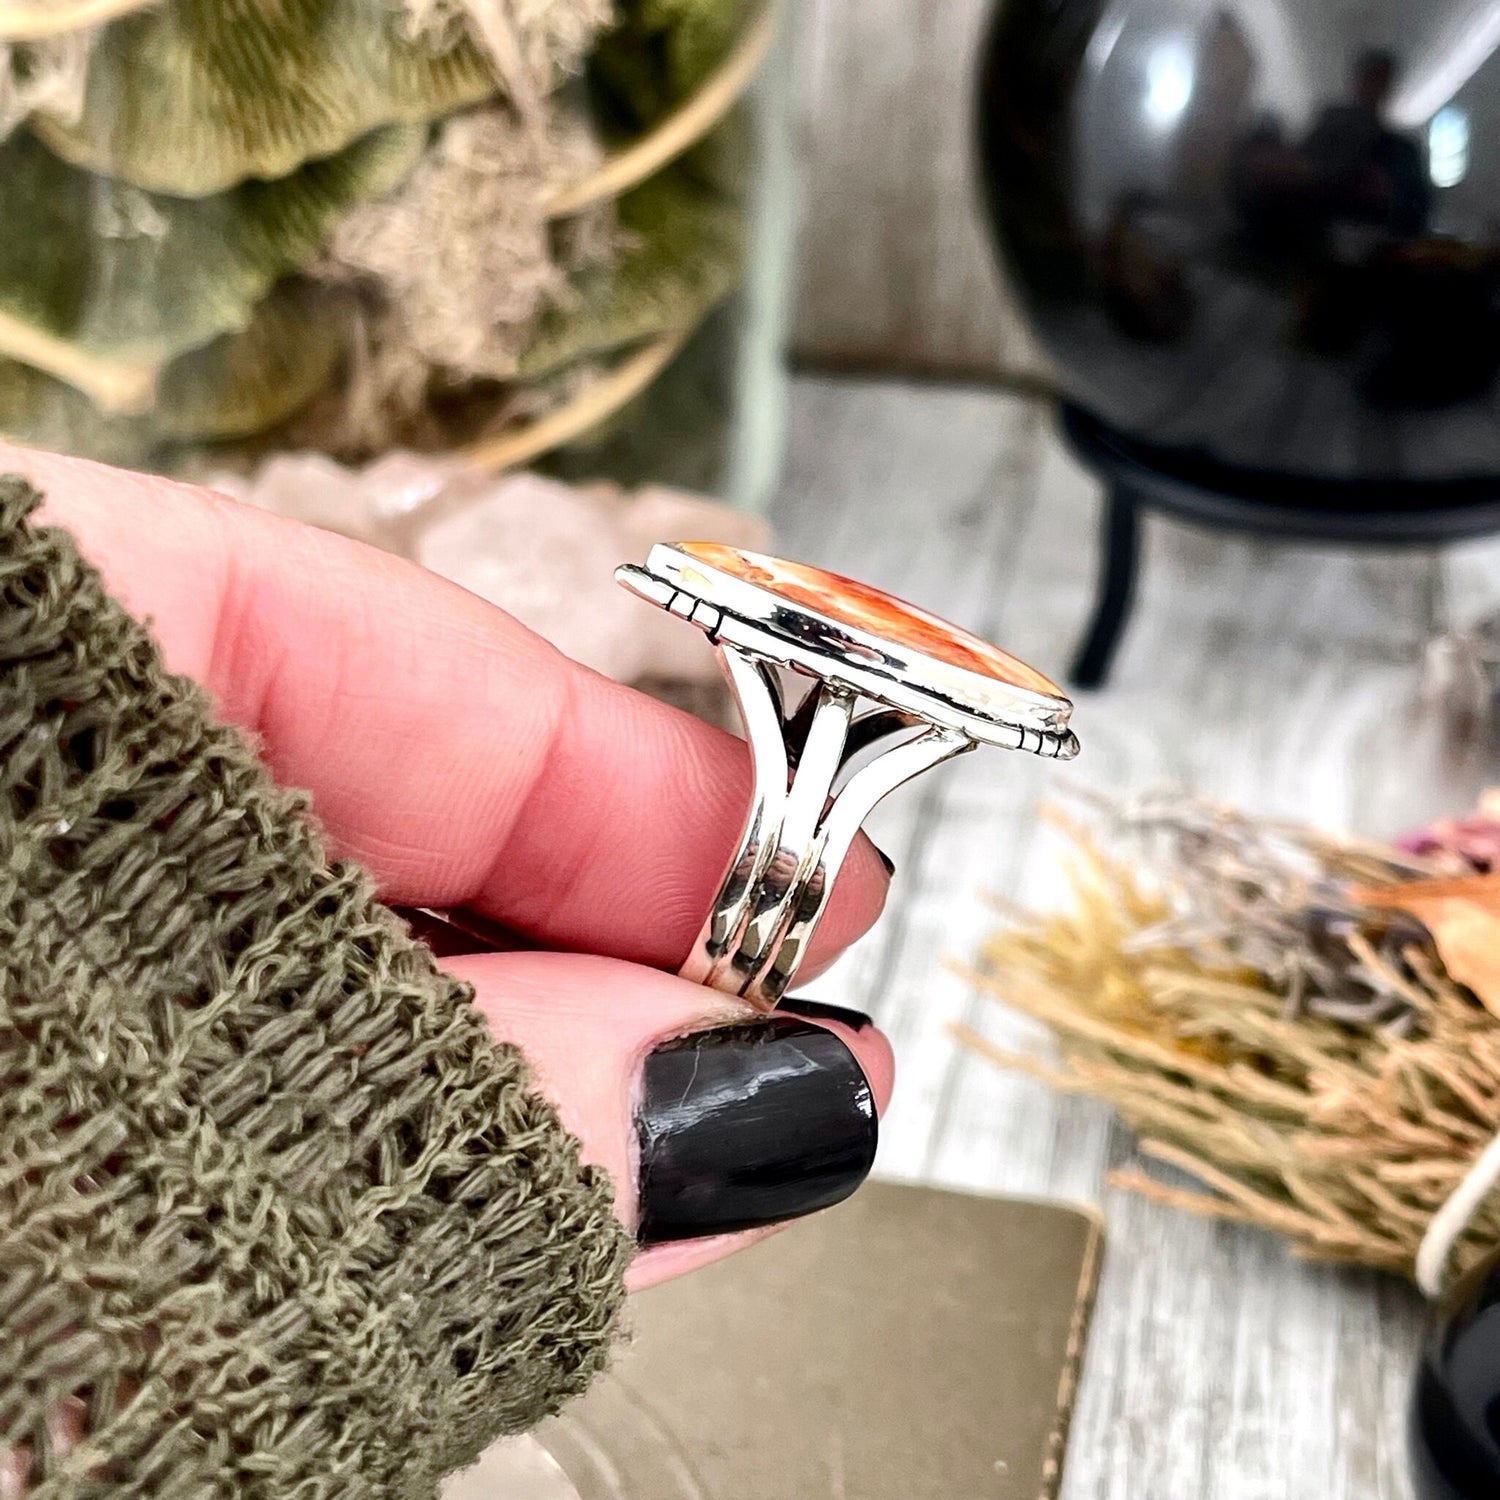 Size 8 Stunning Spiny Oyster Statement Ring Set in Sterling Silver / Curated by FOXLARK Collection